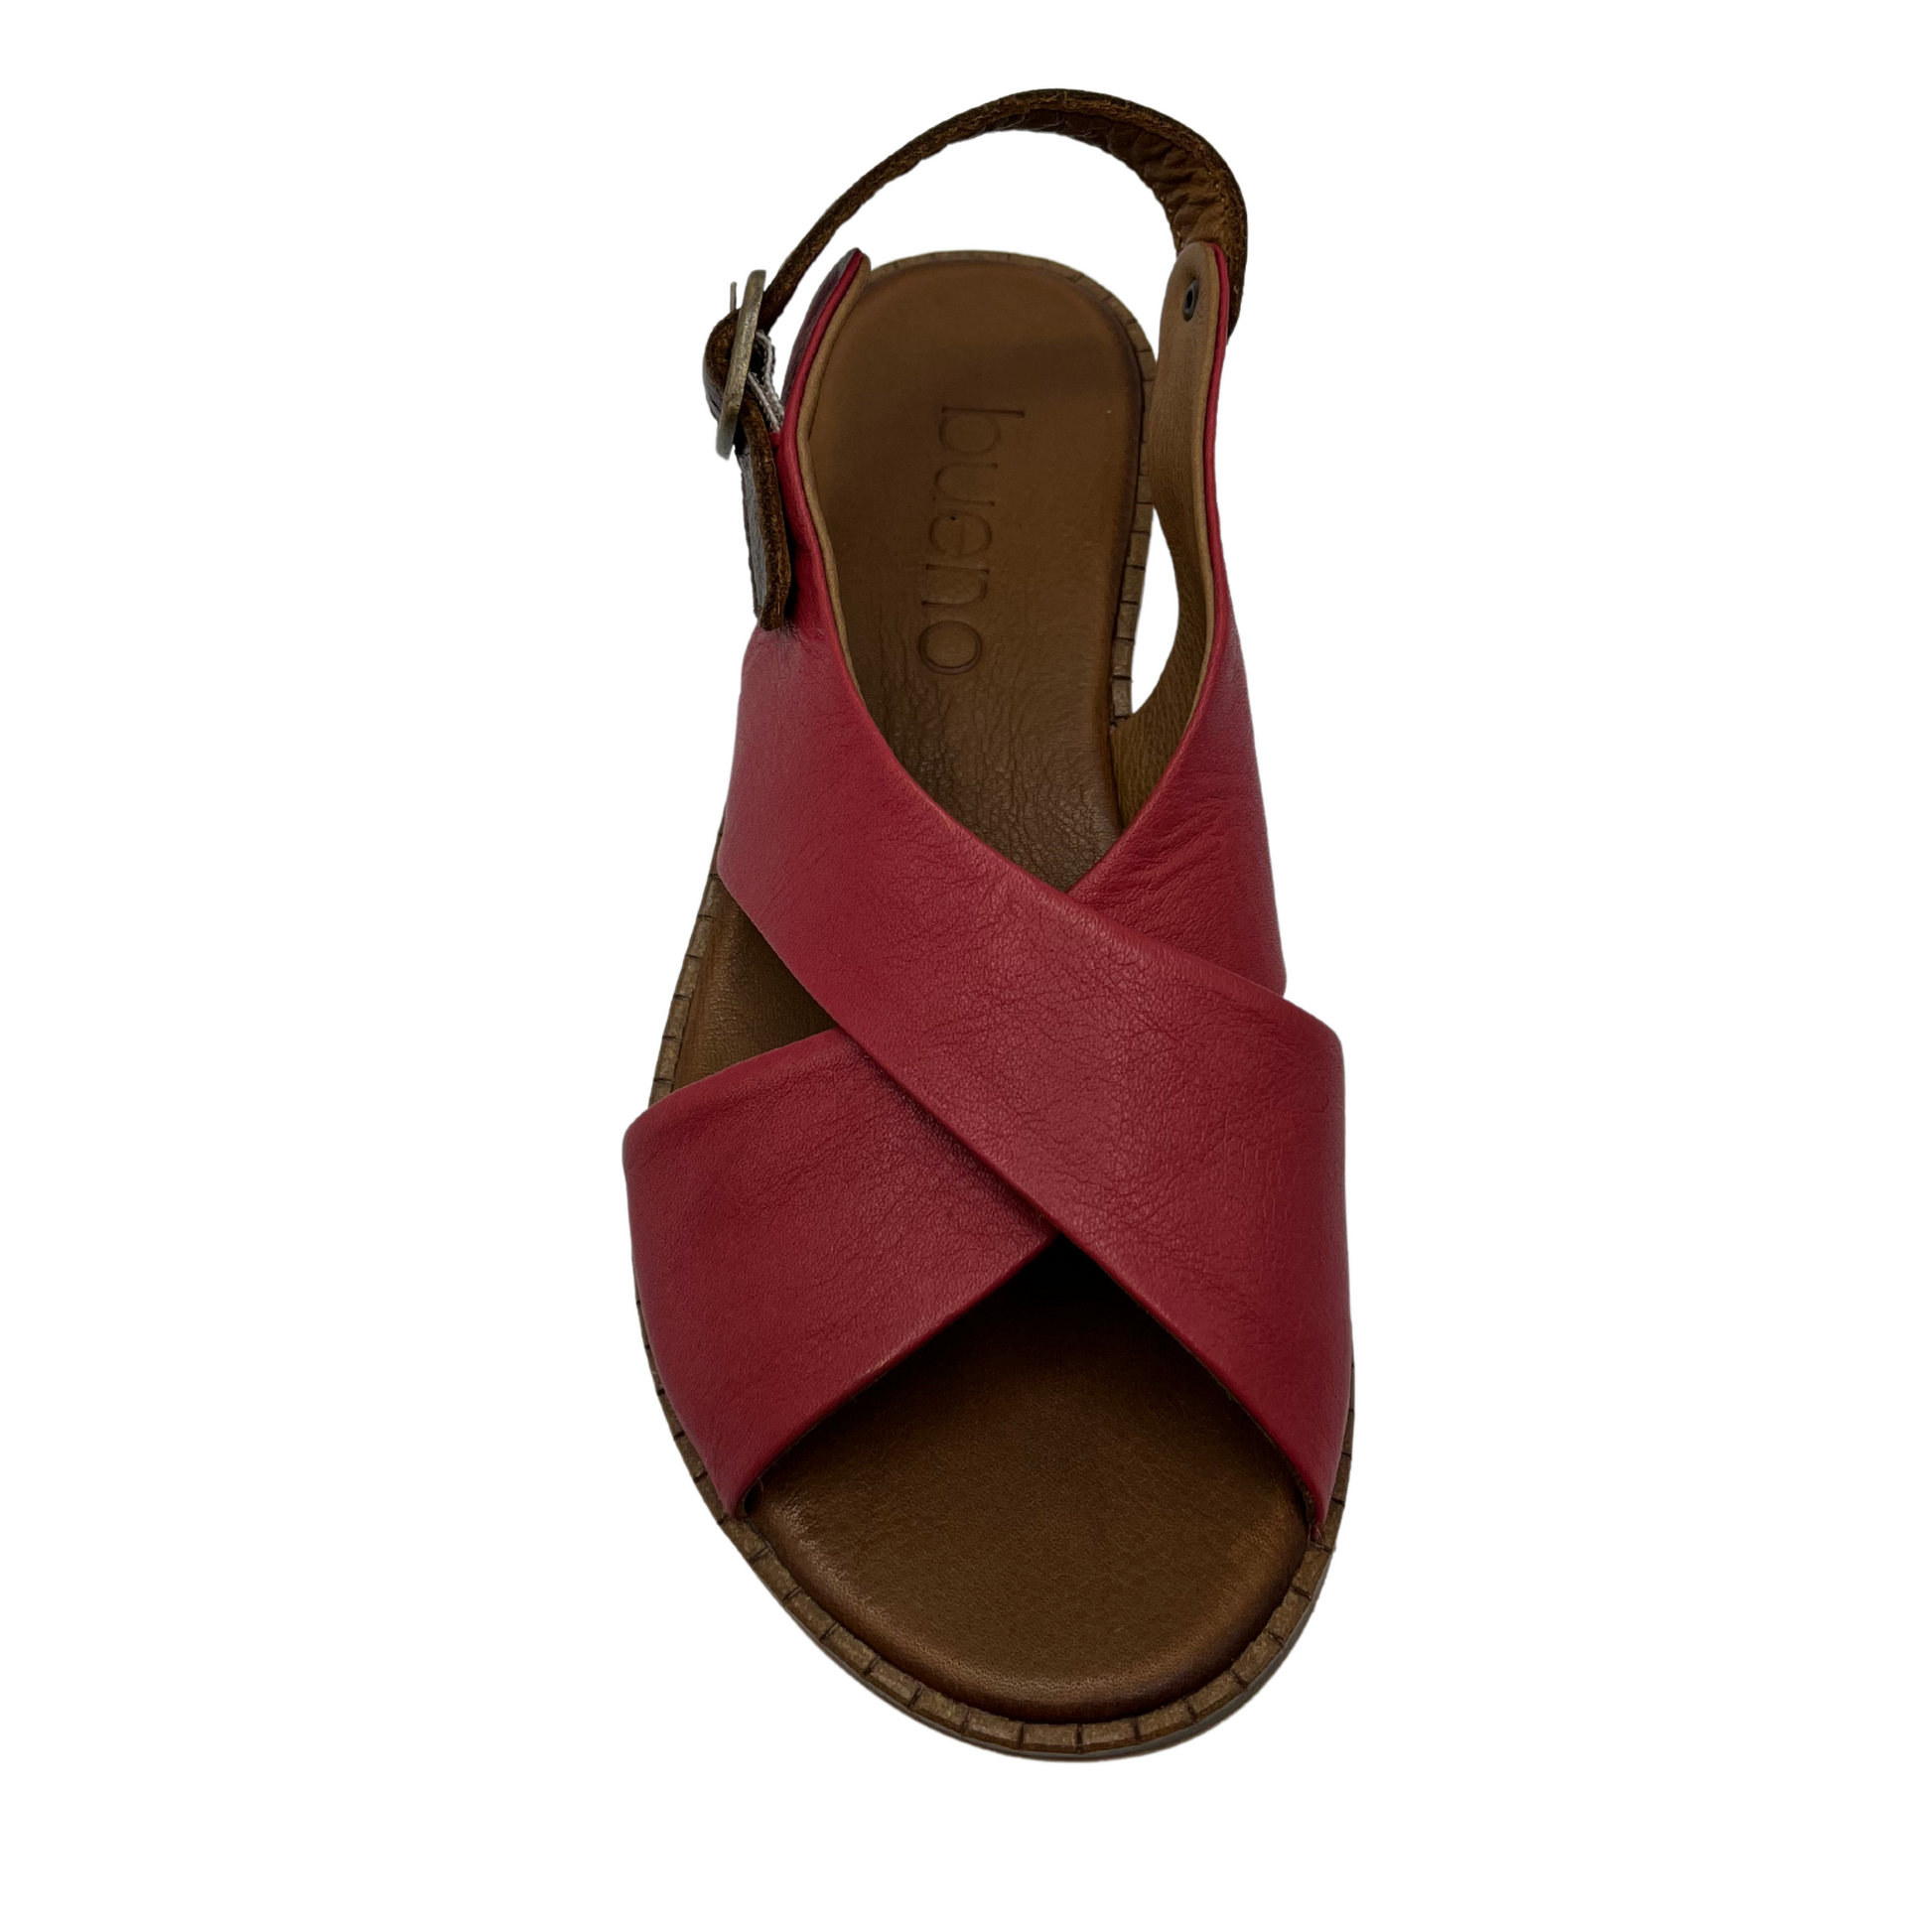 Top view of red leather sandal with cross strap design, slight wedge heel and brown slingback strap